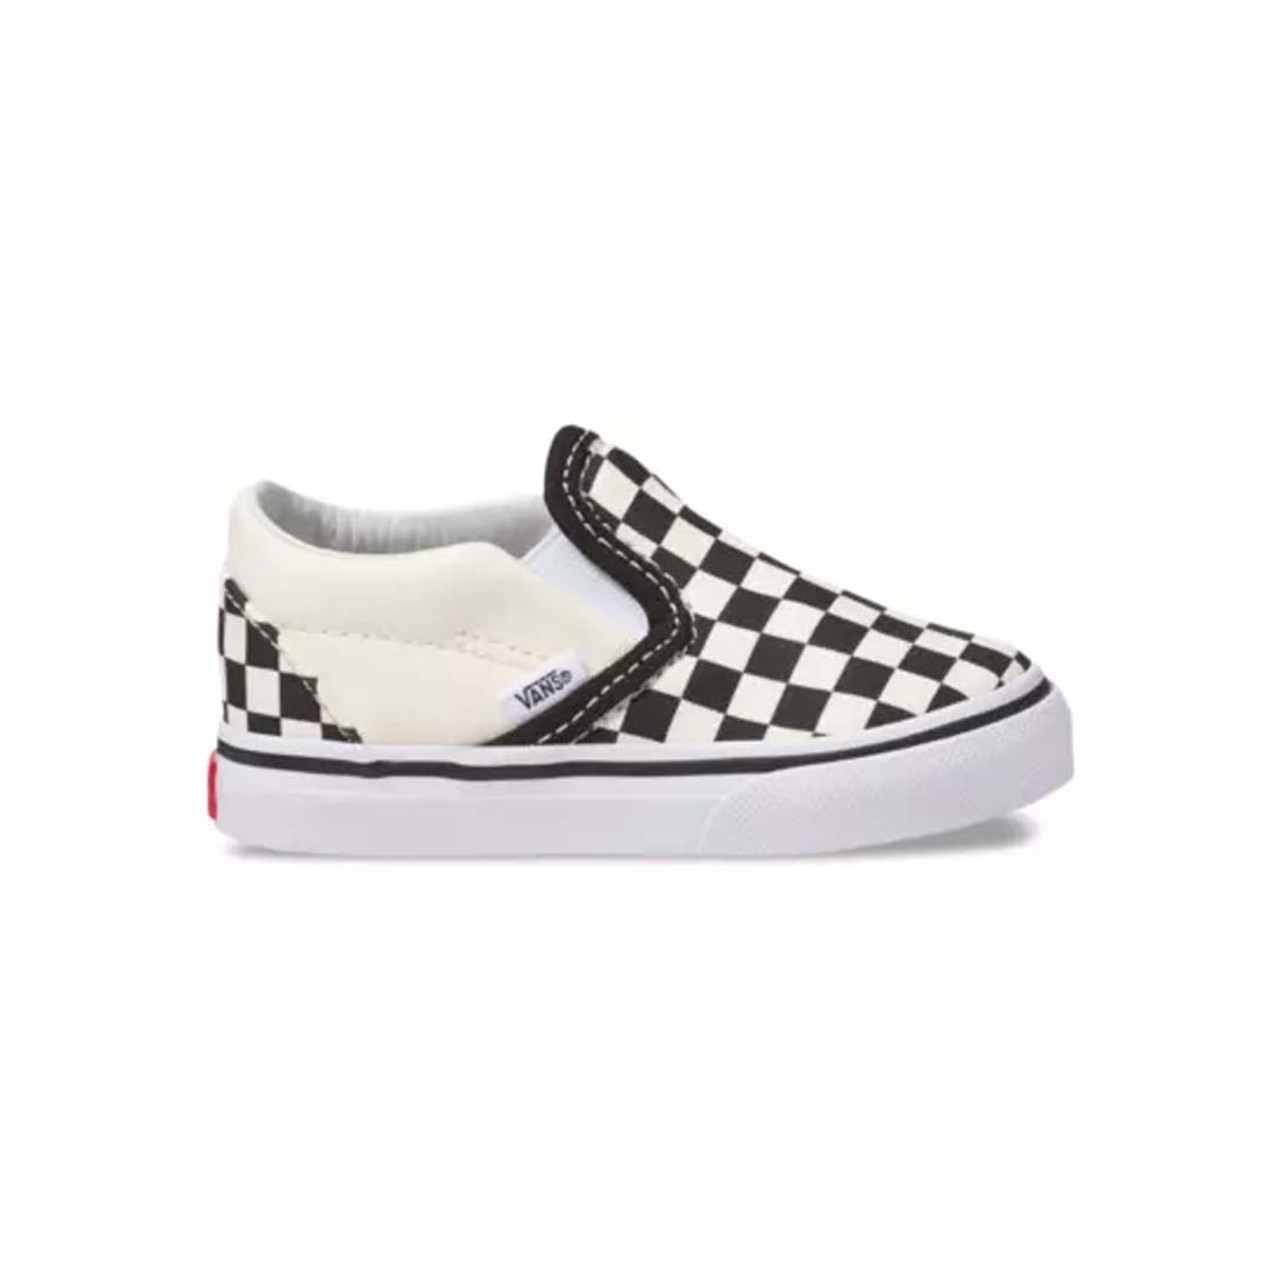 Vans Vans Toddlers' Classic Checkerboard On Shoes Black/Off White Check 34.99 TYLER'S